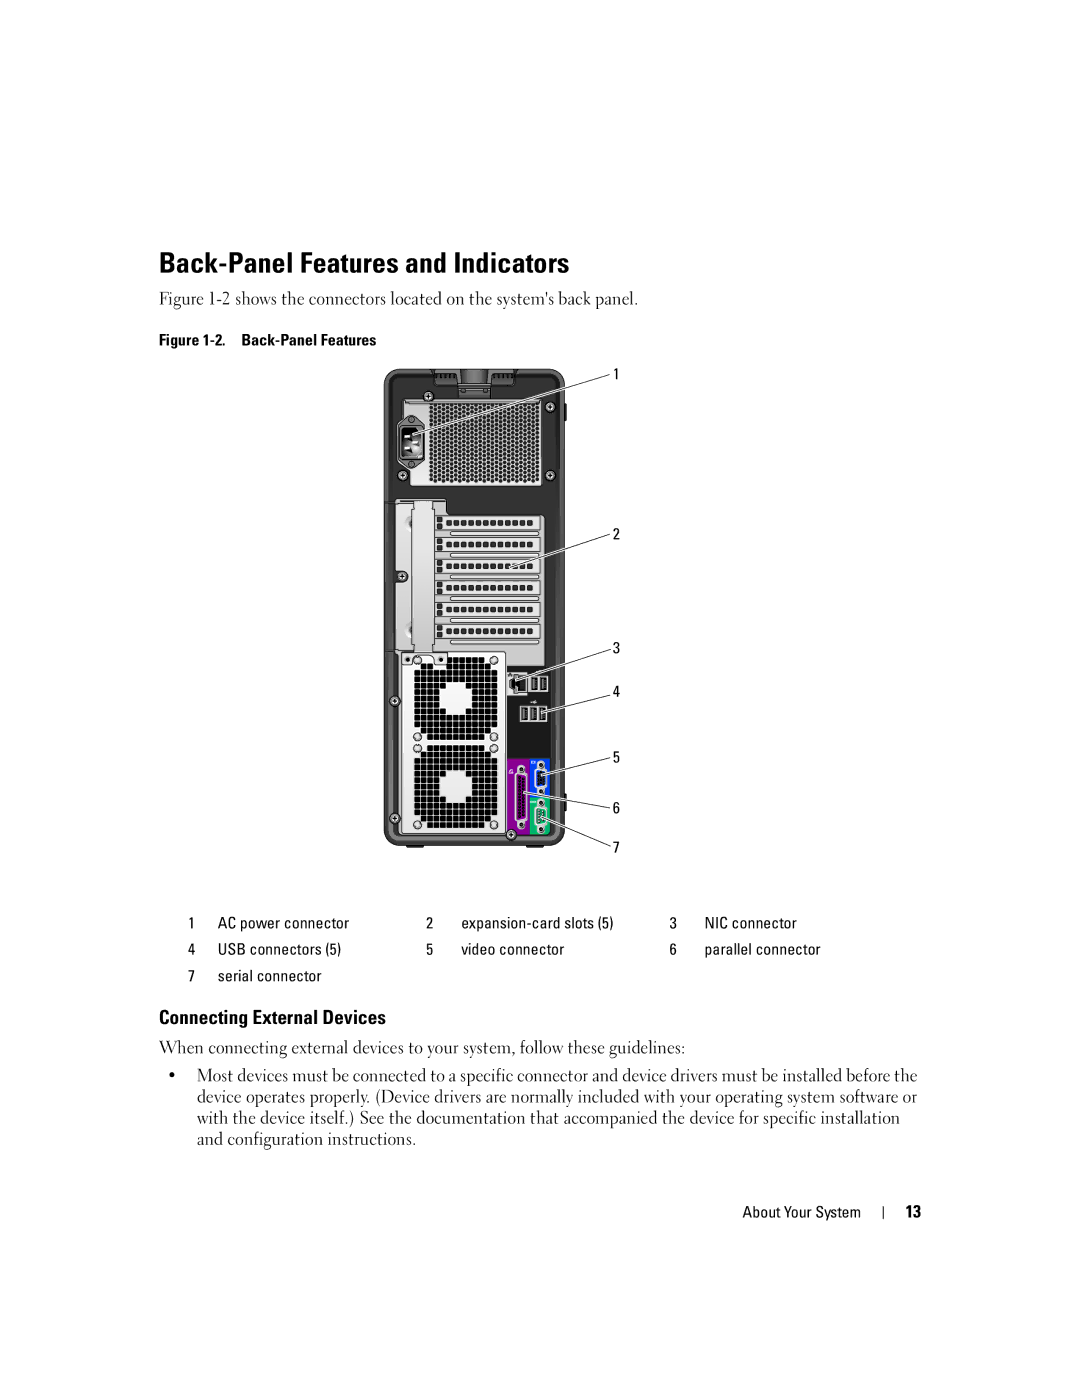 Dell SC1430 owner manual Back-Panel Features and Indicators, Connecting External Devices, Serial connector 